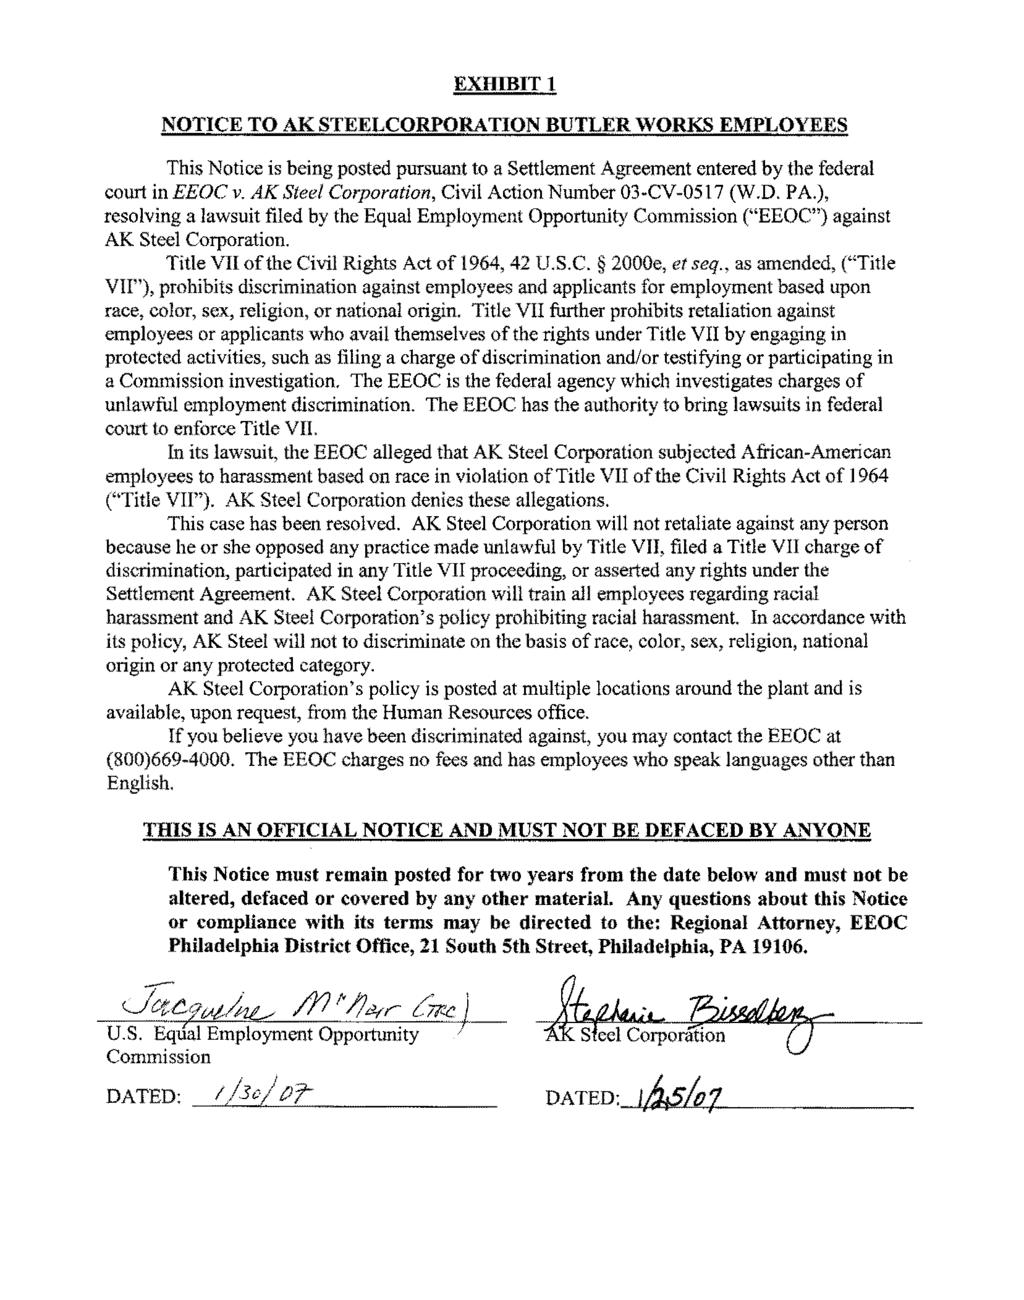 EXHIBIT 1 NOTICE TO AK STEELCORPORA TION BUTLER WORKS EMPLOYEES This Notice is bcing posted pursuant to a Settlement Agreement entered by the federal court in EEOC v.